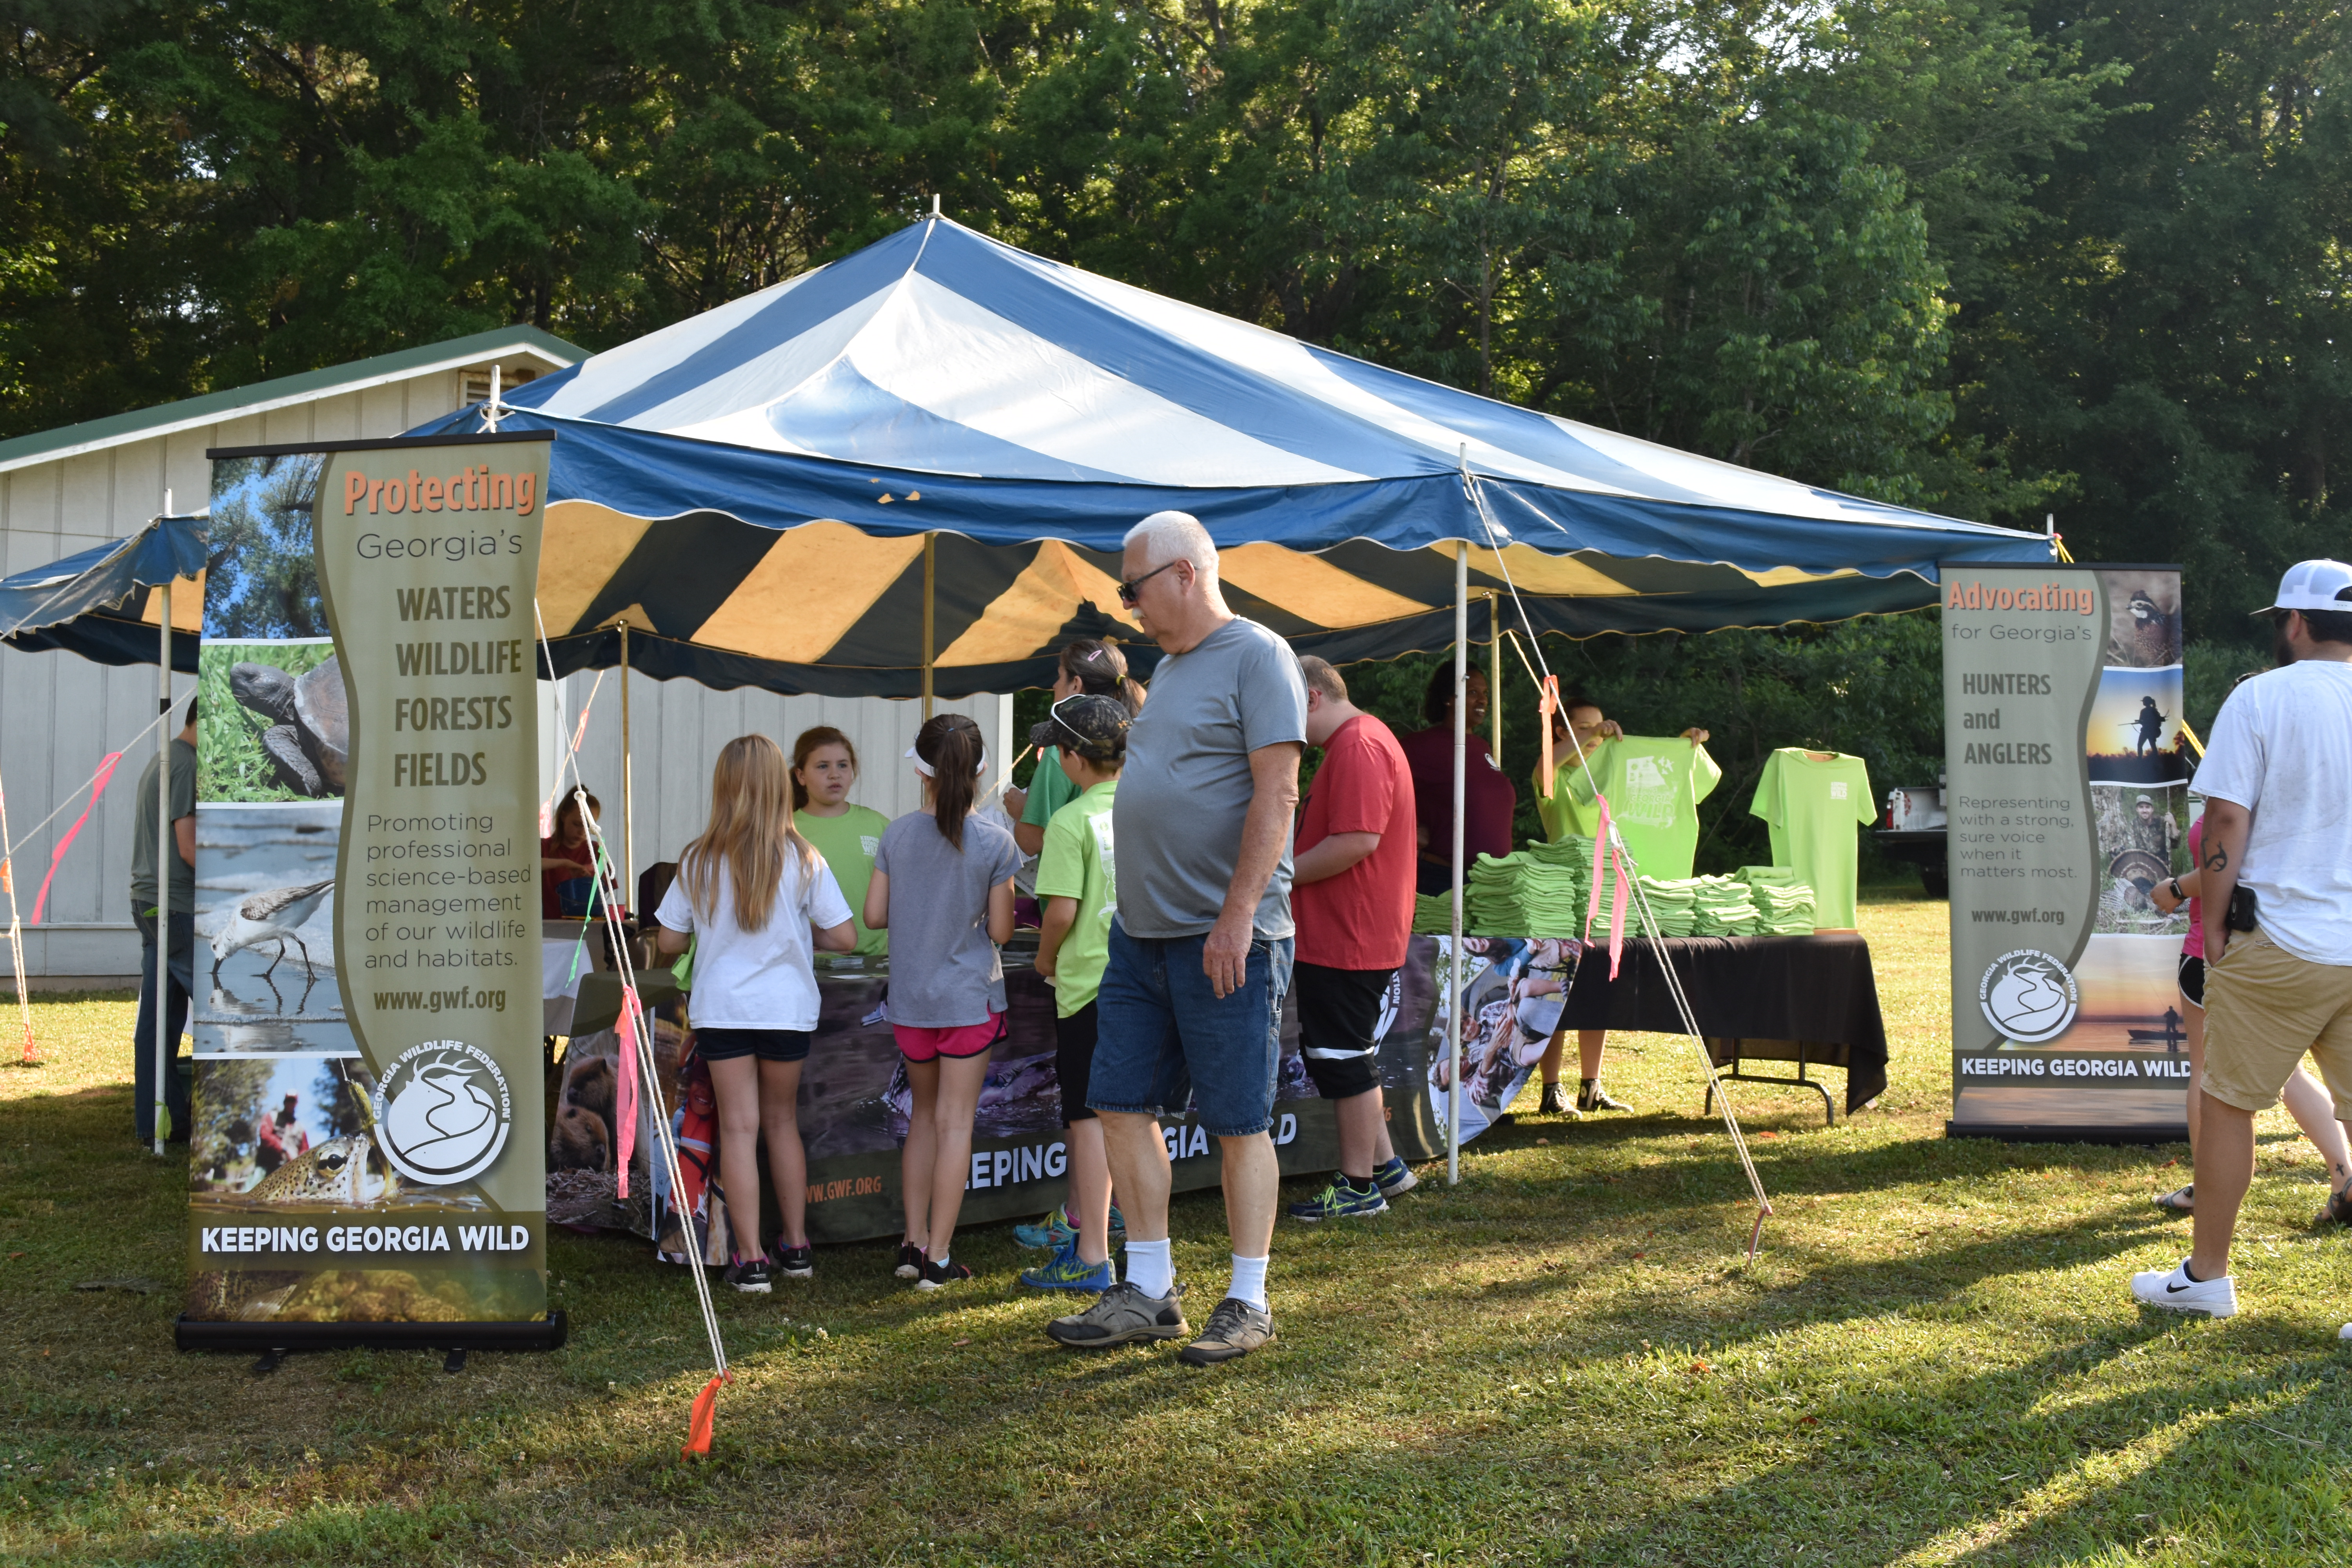 A small group of children gather under a tent to check in for the Georgia Wildlife Federation event.